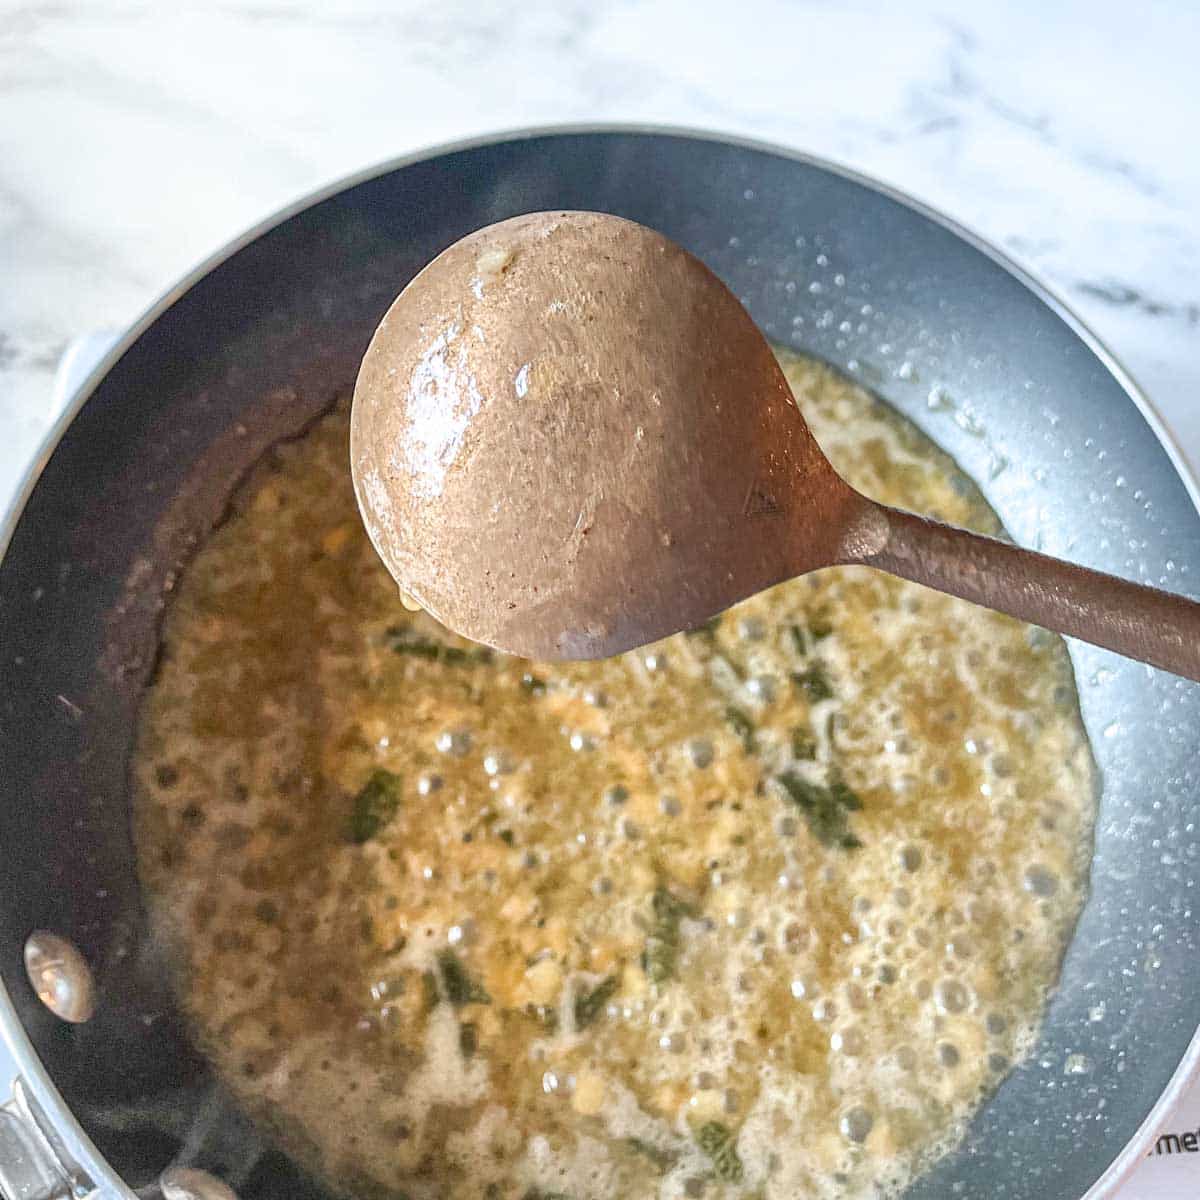 Lobster ravioli sauce is shown coating the back of a spoon with the sauce simmering in the background.